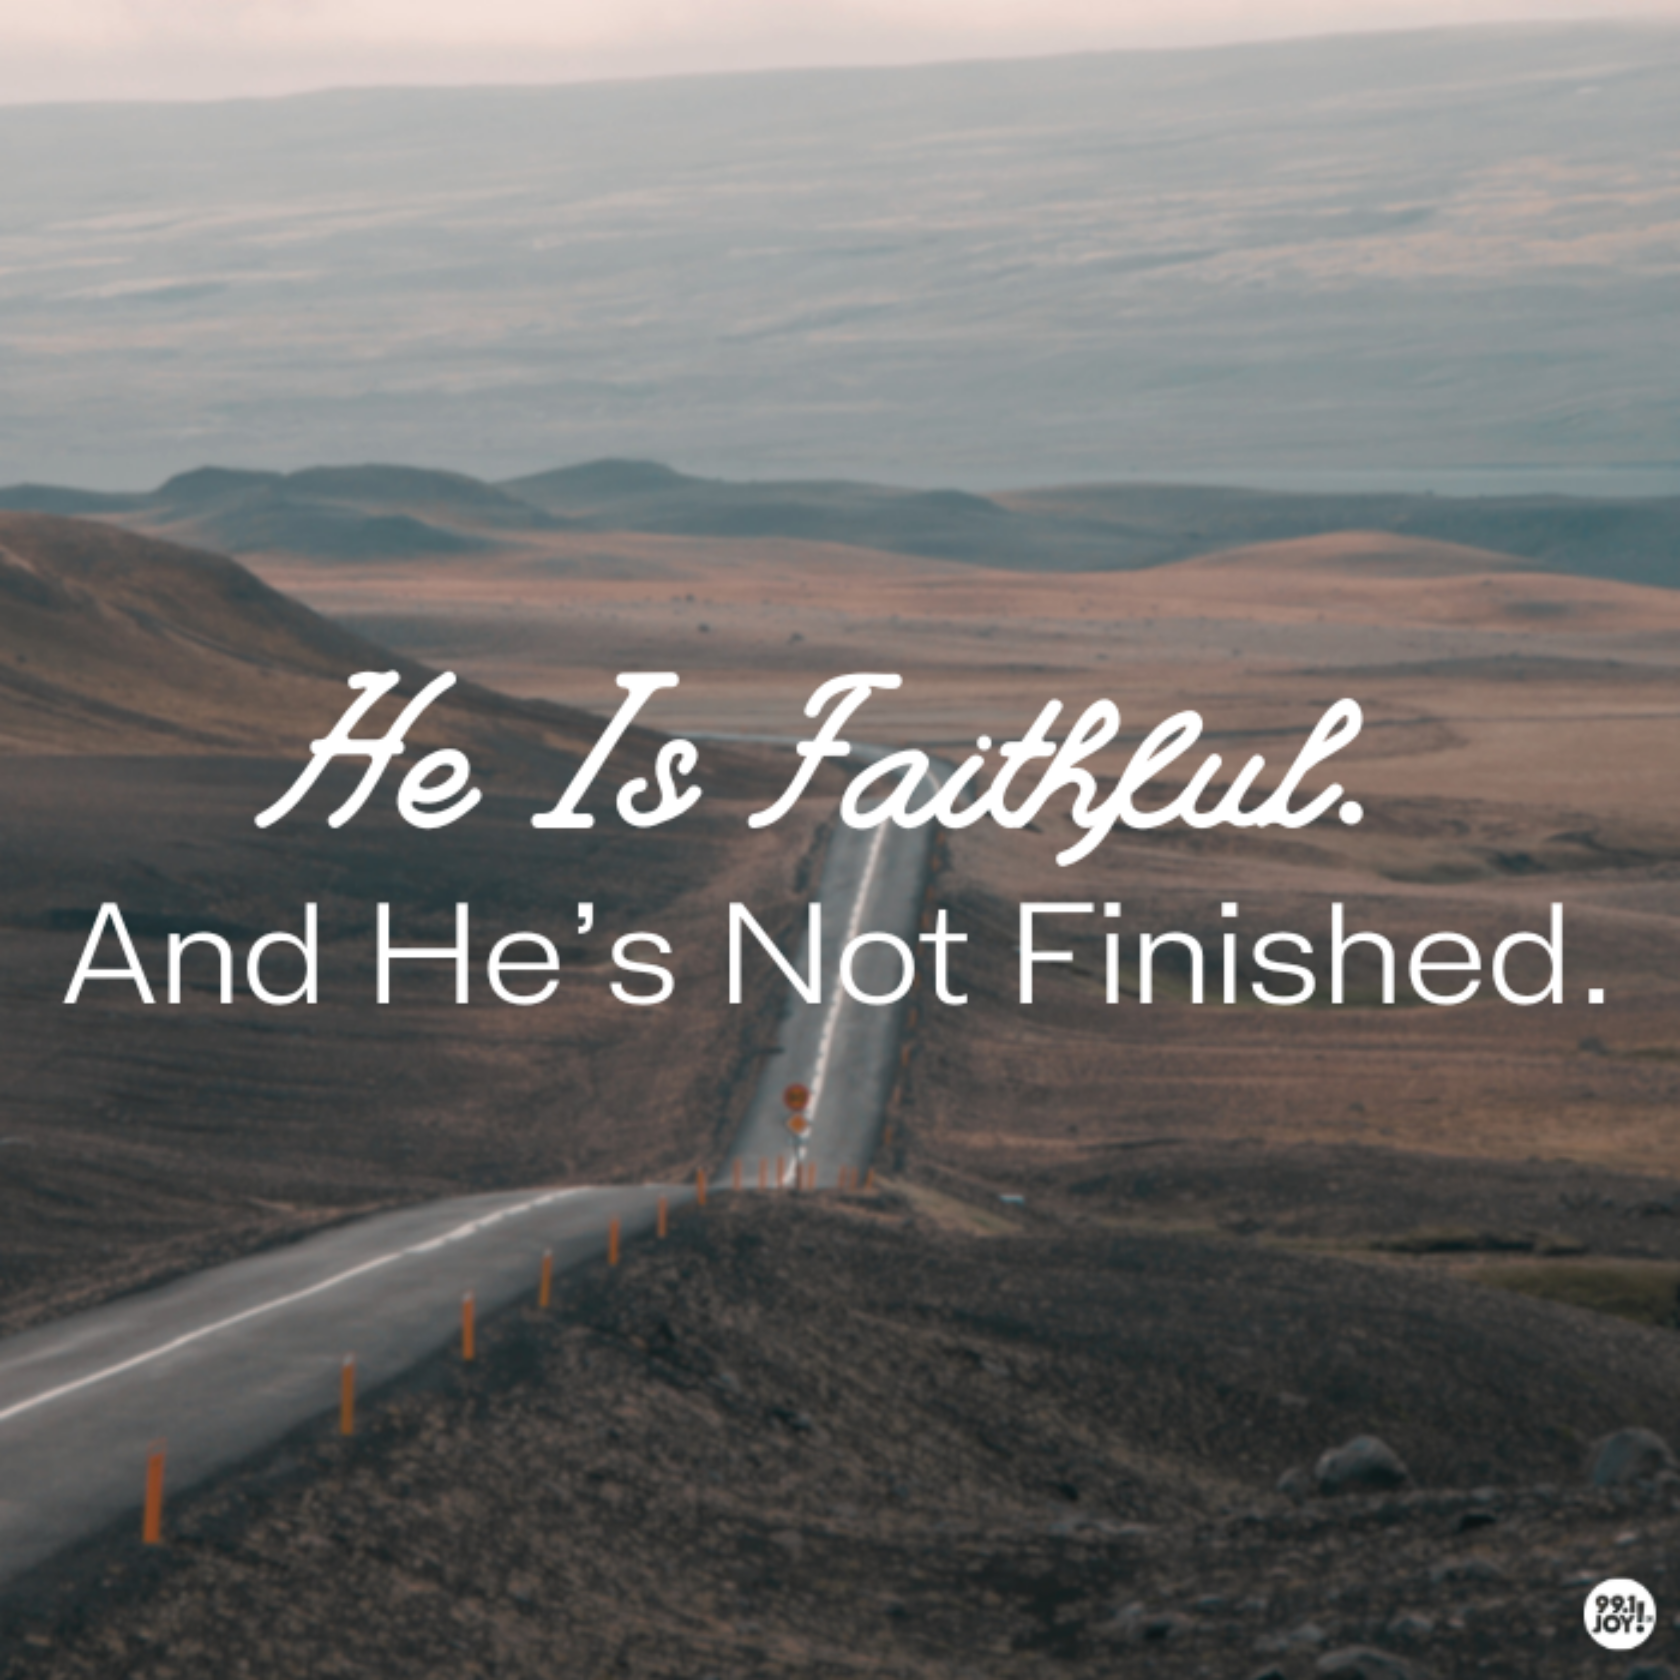 He Is Faithful. And He’s Not Finished